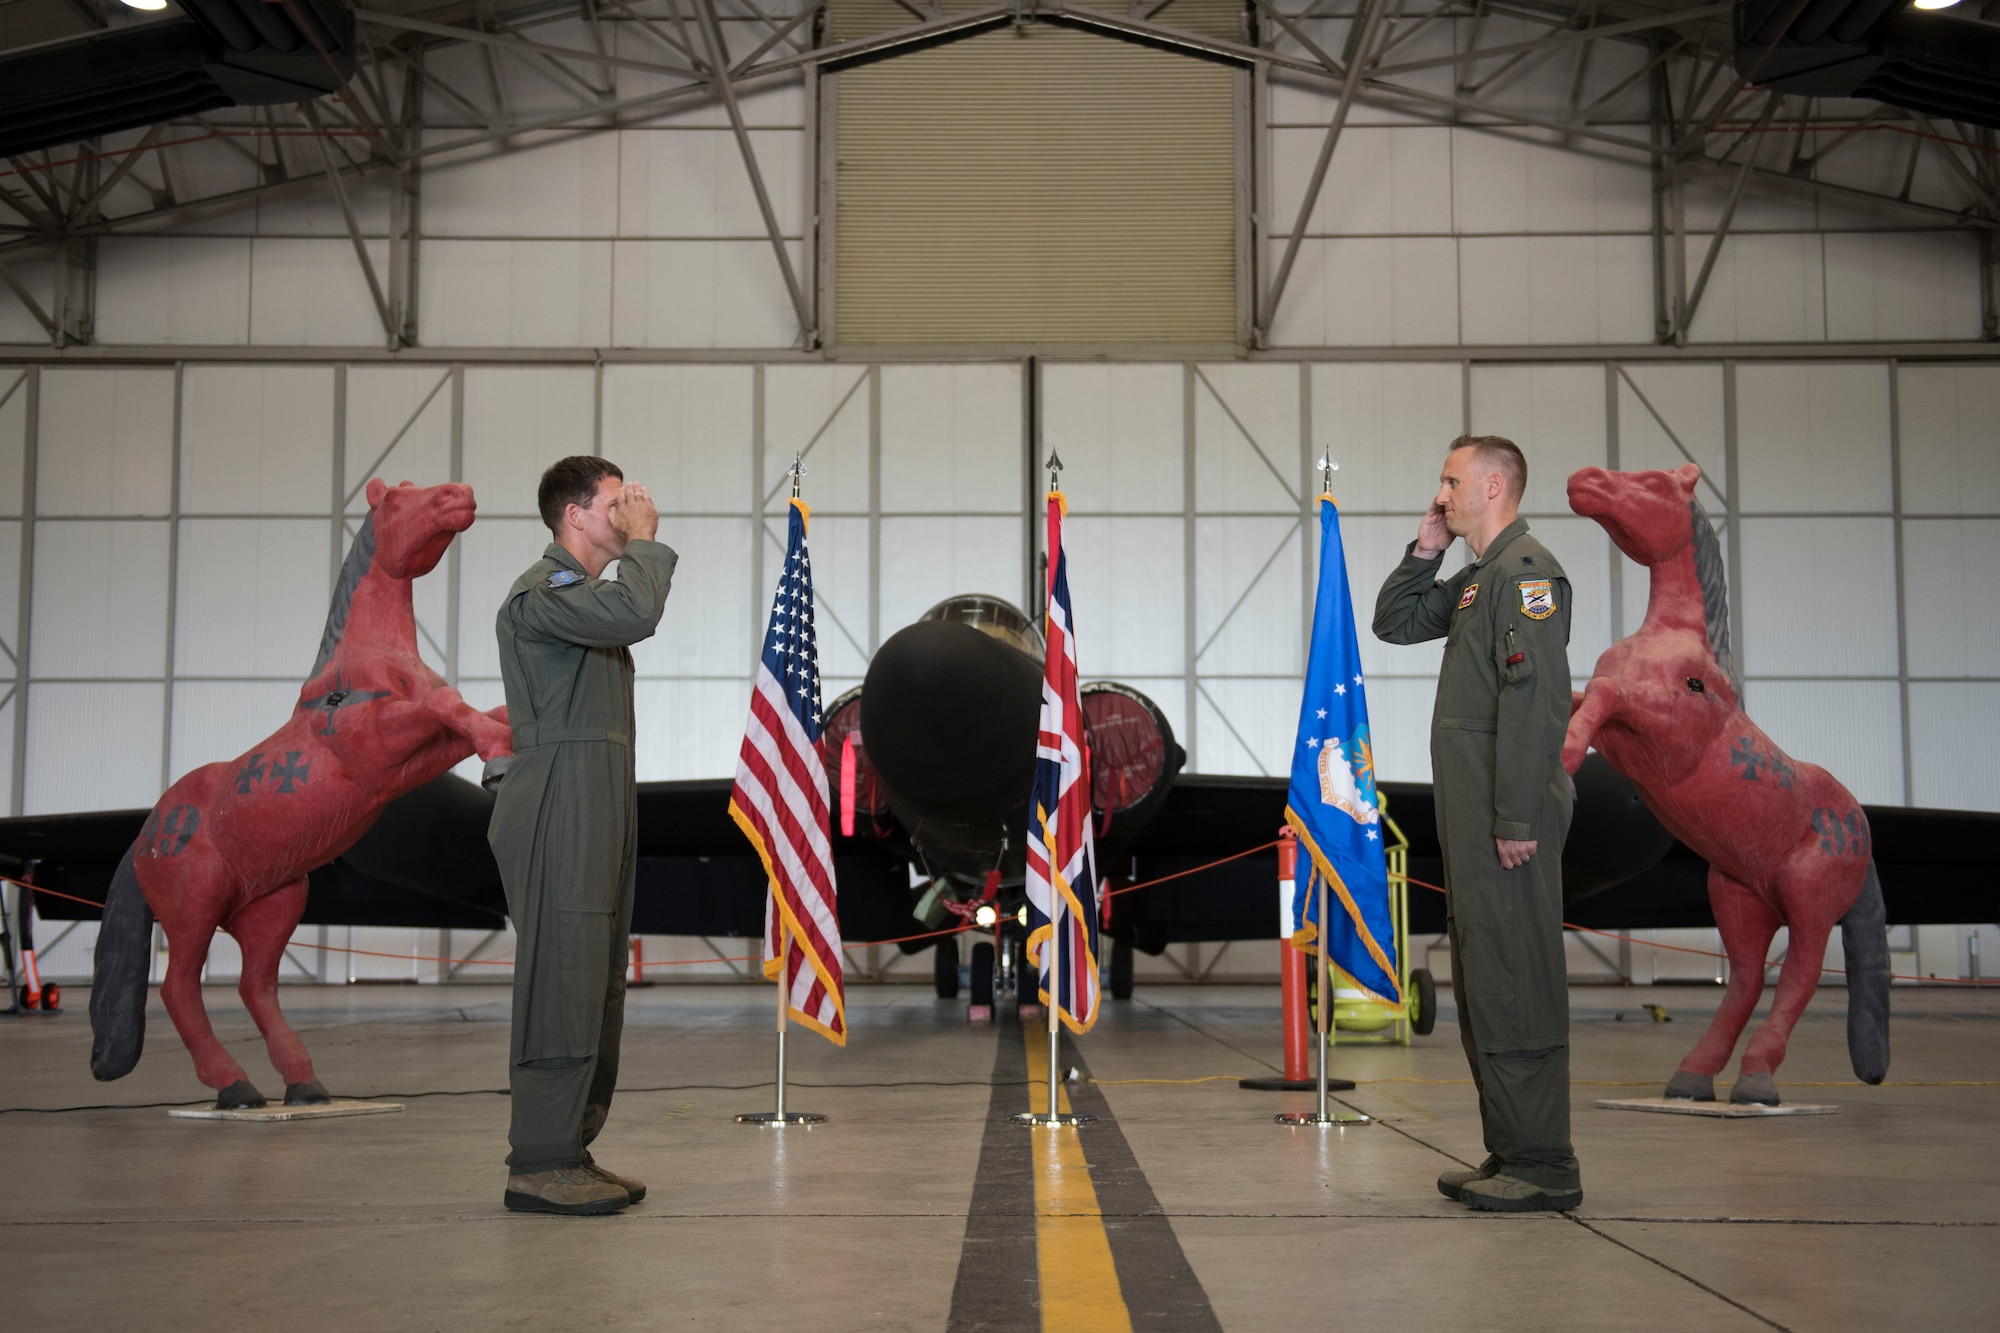 U.S. Air Force Lt. Col. Peter Gryn, right, outgoing 99th Expeditionary Reconnaissance Squadron commander, receives The Meritorious Service Medal from Col. Jason Camilletti, left, 48th Operations Group commander and presiding officer, during a change of command ceremony, at RAF Fairford, England, June 24, 2020. The change of command ceremony is a military tradition that represents a formal transfer of a unit’s authority and responsibility from one commander to another. (U.S. Air Force photo by Airman 1st Class Jennifer Zima)